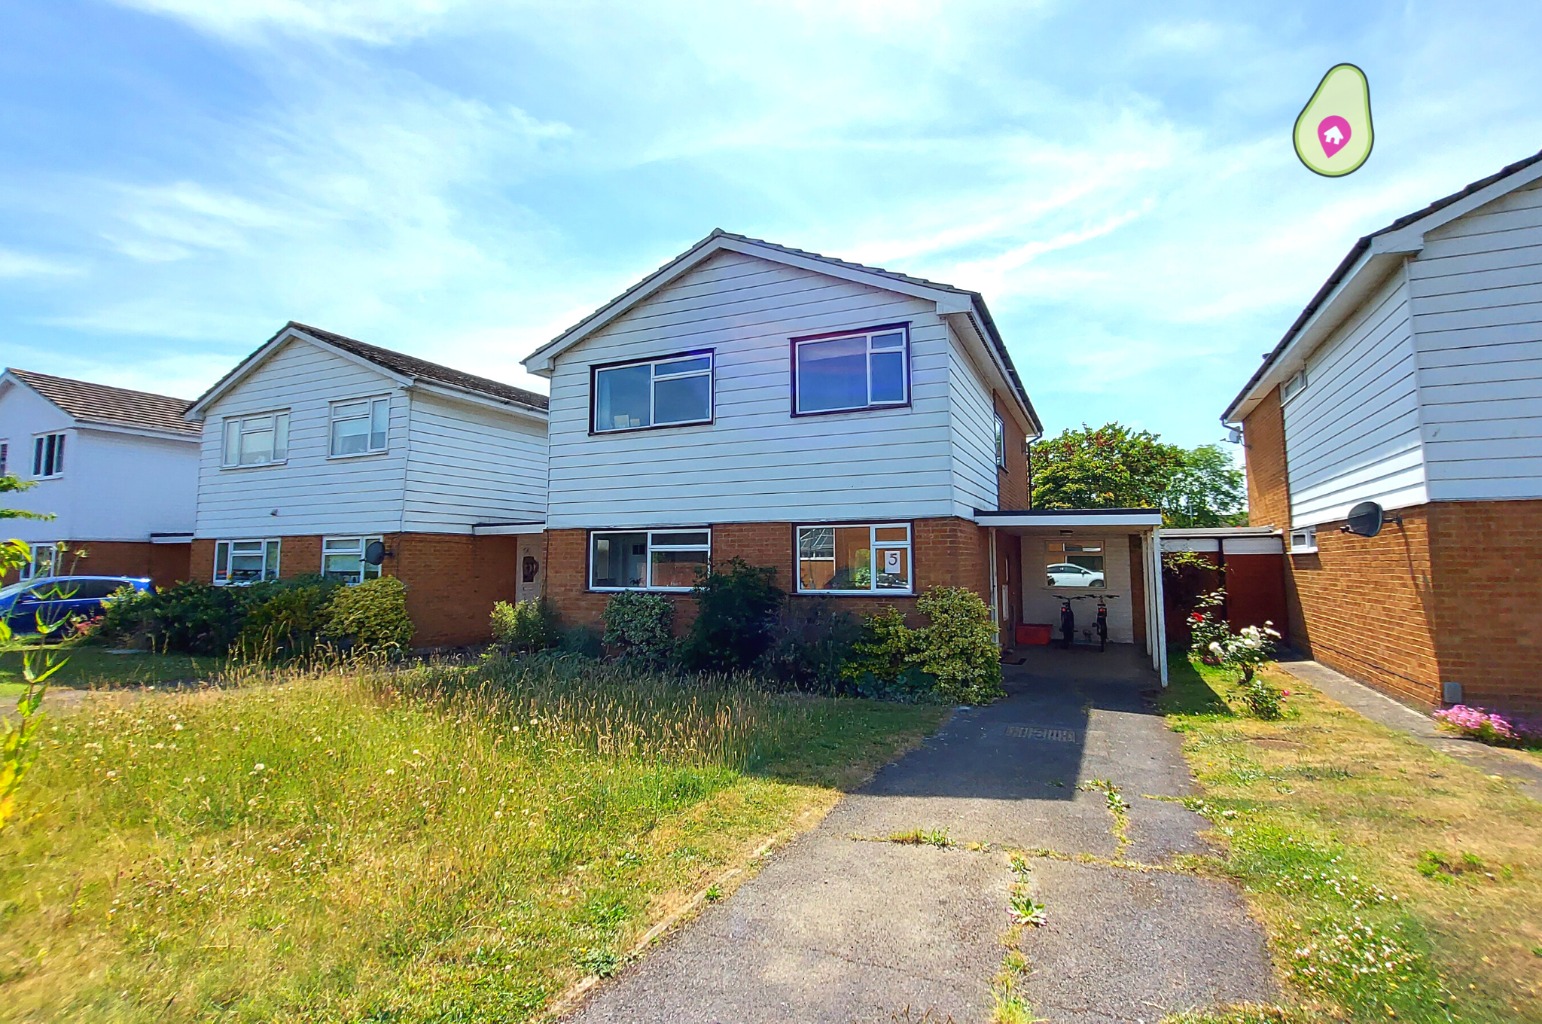 This great size four bedroom link detached house has so much to offer and make an excellent family home. The property is situated in a quiet cul de sac and is within easy reach of Twyford, Woodley and Reading with all of their amenities.